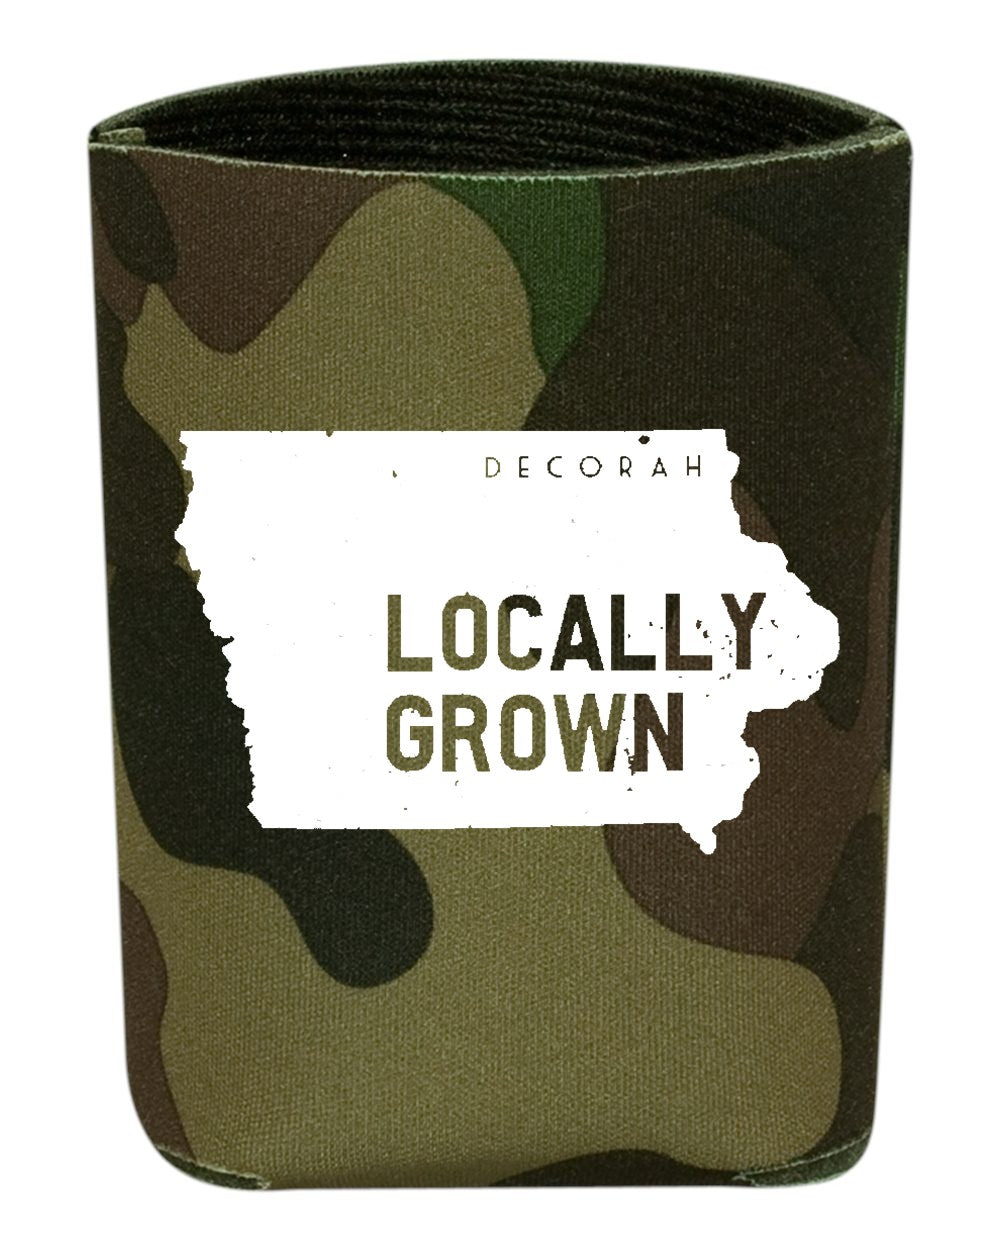 Locally Grown - Koozie - Multiple Color Options